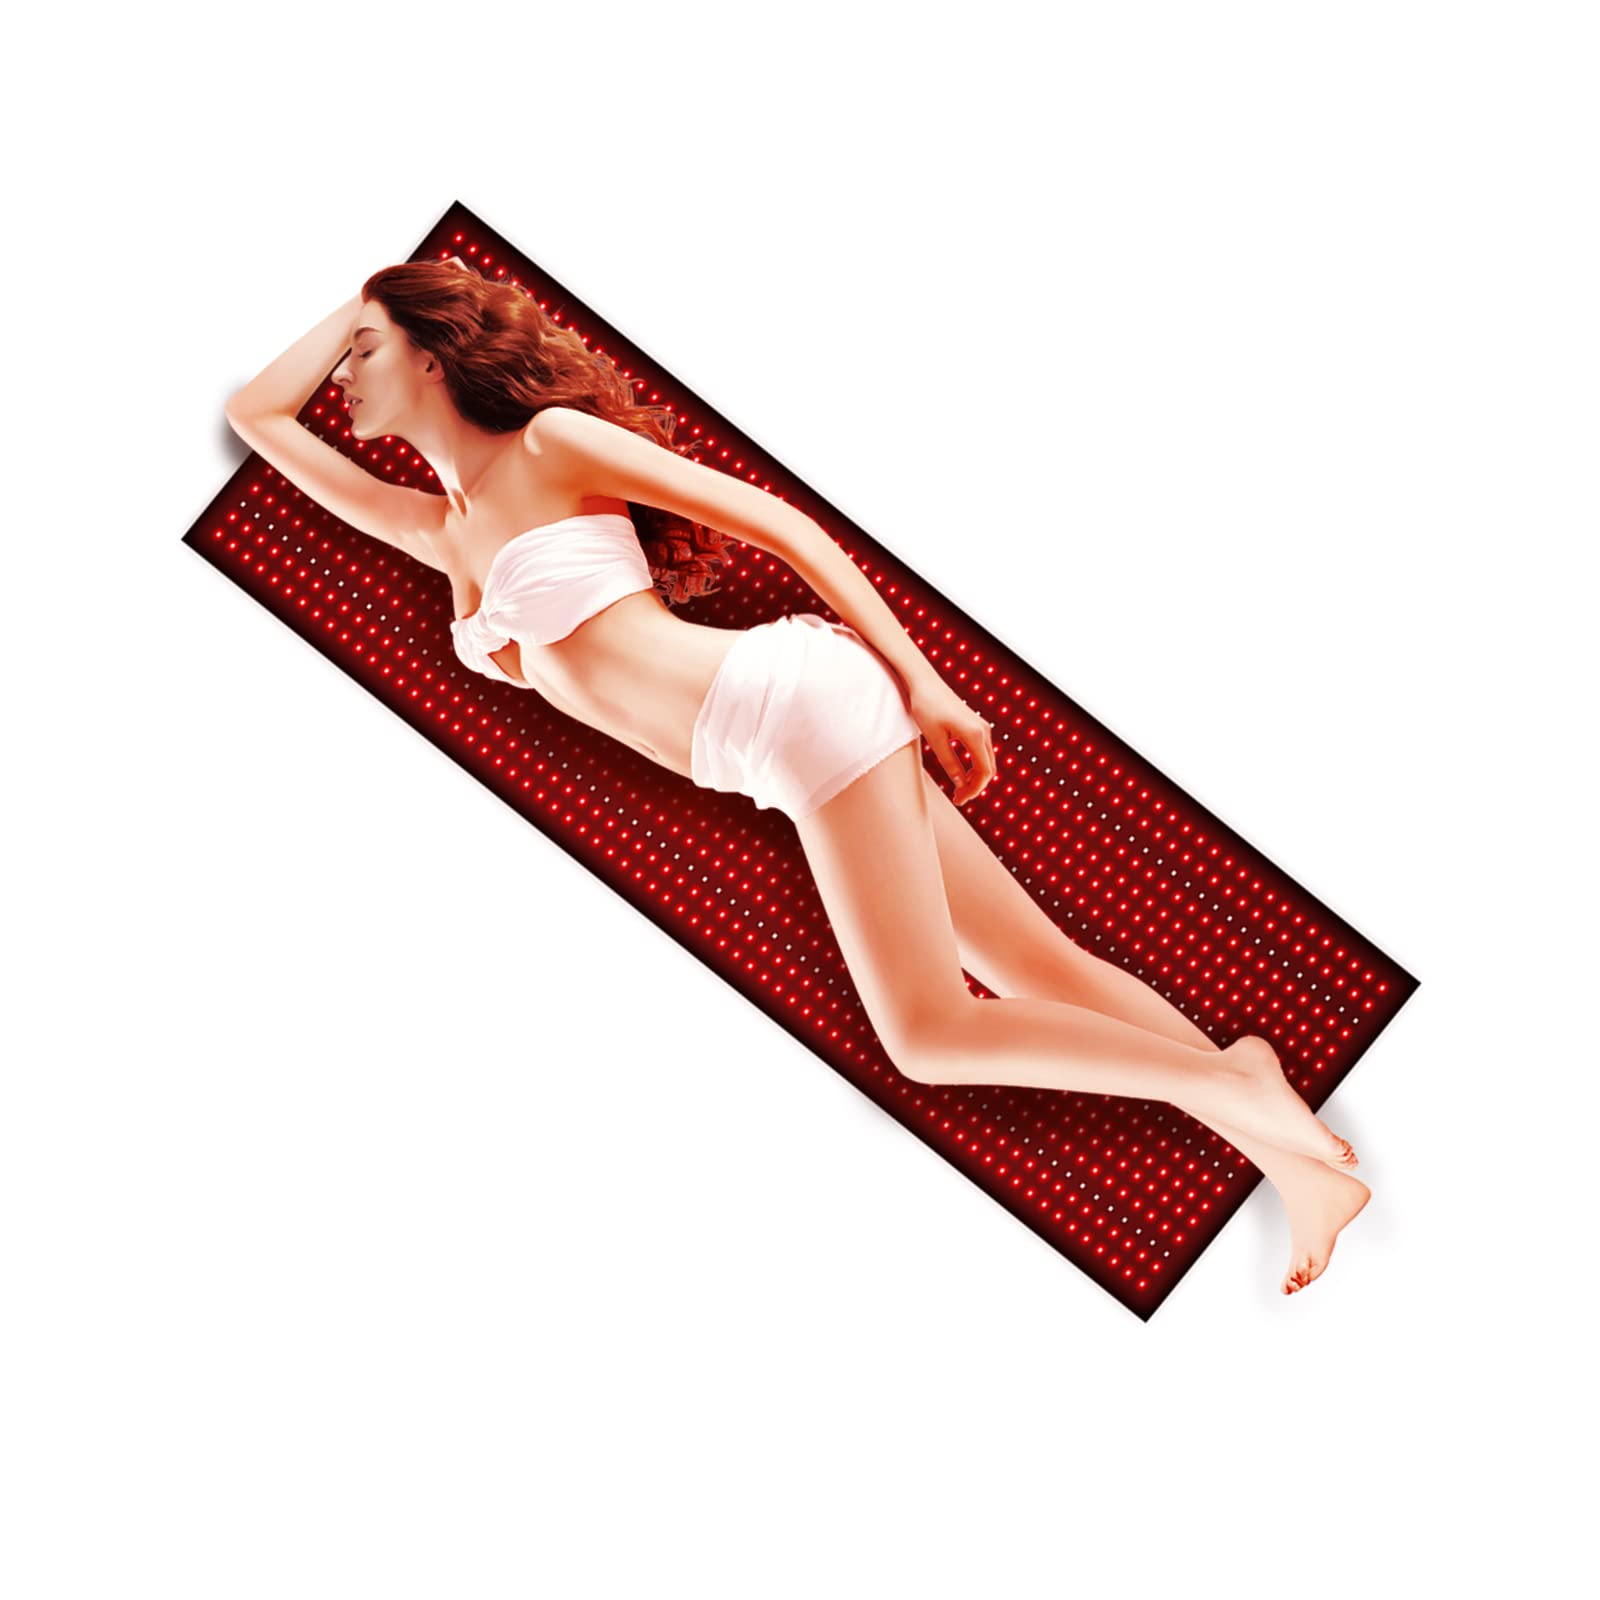 Red Light Therapy for Body Infrared Light Therapy Light Pad 1260Pcs Led Light Therapy Mat for Full Body 63 in”x27.5in”Home Laying Red Pad with Pulsing Mode,Heating Mode,Adjustable Timer